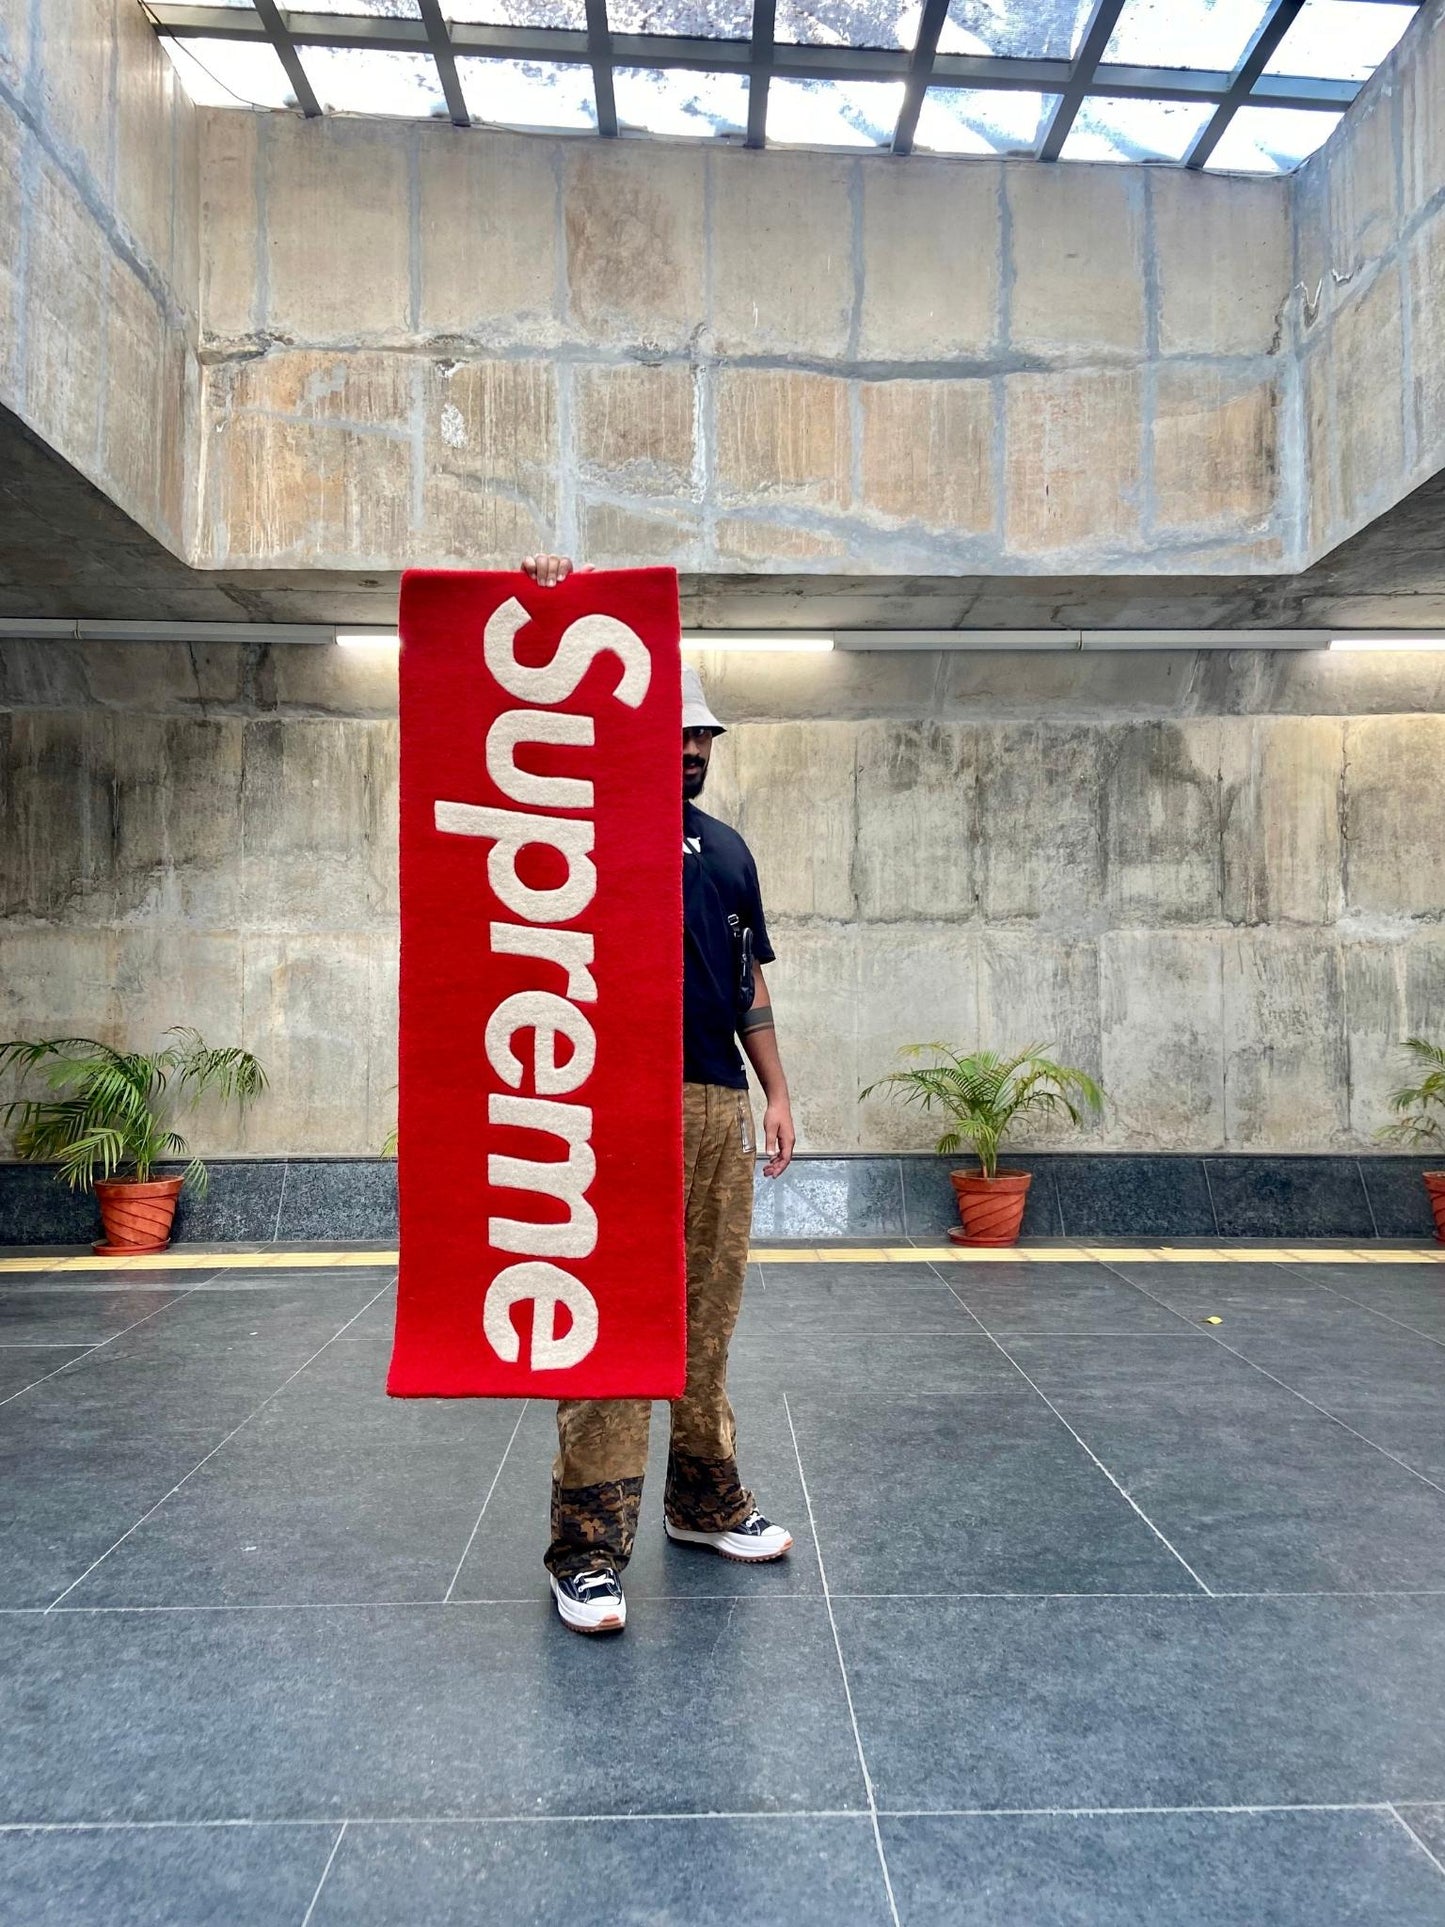 The Red Supreme Rug